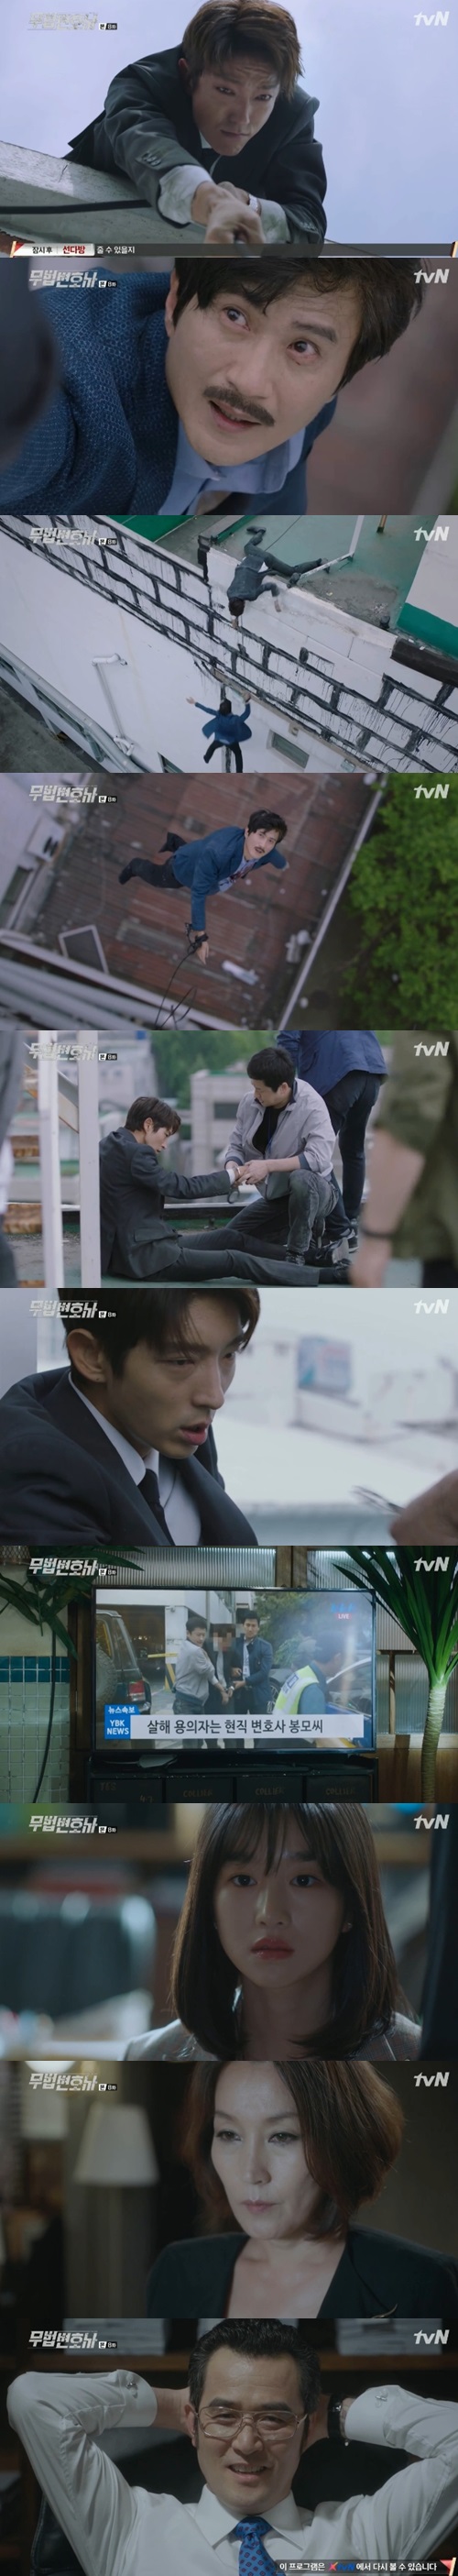 Choi Min-soo has Lee Joon-gi on top of his uncle, Ahn Nae-sang Raw Justice.In the 8th episode of TVNs weekend drama Lawless Lawyer (playplayed by Yoon Hyun-ho/directed by Kim Jin-min) broadcast on June 3, An Oh-ju (played by Choi Min-soo) put an Innocent Man on Bong Sang-pil (played by Lee Joon-gi).Ha Jae-yi (Seo Ye-ji) did not recognize his mother, Roh Hyun-joo (Baek Joo-hee), who returned to life after 18 years, and Roh Hyun-joo shed tears without her daughter, Ha Jae-yi, in front of her.Choi For Heroes (Ahn Nae-sang) met after learning that Roh Hyun-joo, who was involved in the death of his sister Choi Jin-ae (Shin Eun-jung), had returned.If you can live with your husband and daughter, you can do anything, Roh told For Heroes.In the meantime, Cha Moon-sook (Lee Hye-young) asked Ha Jae-yis father Gi-ho Ha (Lee Han-wi) to release Ha Jae-yis lawyers disciplinary action to go into the Seoul large law firm he introduces.Cha Moon-sook was stretched by the relationship between Ha Jae-yi and Bong Sang-pil, and Gi-ho Ha shouted, I will go up.Gi-ho Ha forced her daughter Ha Jae-yi to a large law firm, and Ha Jae-yi said, Chief judge, Dad is not the person he thinks.The case of my mother, it was all made by the second judge. Ha Jae-yi packed up and ran away that night.In the meantime, Ahn Oh-joo made a tail-cut of Son Sung-sik, and donated the Oju Group to the Cha Byung-ho Foundation,I cut my arm, so I have to do something. I am a very precious person to Bong Sang-pil.Stop it, Blackmail – Cinémix Par Chloé said, and Bong asked his uncle, For Heroes, to keep him safe.Bong also promised Chun Seung-beom (Park Ho-san) to create a new case.Nam Soon-ja (Yong Hye-ran) found out that Cha Moon-sooks chiropractor had leaked information to An-oh-joo, and he sought a new chiropractor, and Roh Hyun-joo was hired.I said, Listen to your head. I made tension, but I did not know Noh Hyun-joo.At that time, Bong Sang-pil bought Hajae and flowers and headed to the park, and celebrated his mother, Roh Hyun-joos birthday, which Hajae wanted to take care of.An Oju told For Heroes, Bong Sang-pil should take you up to Seoul. Blackmail – Cinémix Par Chloé, and Choi For Heroes refused, It is a solution to see your invoice.He injected the drug that did not come to Choi, and Choi Heroes fell.An Oju tried to manipulate Chois suicide, and Choi said, Dont come, its a trap, but Bong ran to save Choi For Heroes.For Heroes was on the verge of a fall, hanging from a string.Im already late, said For Heroes, although Bong said, and youre going to die. But Bong said, I ran away when my mother died.Im not going to run away again, she cried, but for Heroes said, Dont take revenge if I die. Be a good lawyer.I am happy, he said, leaving Bong Sang-pils hand and falling.Yoo Gyeong-sang